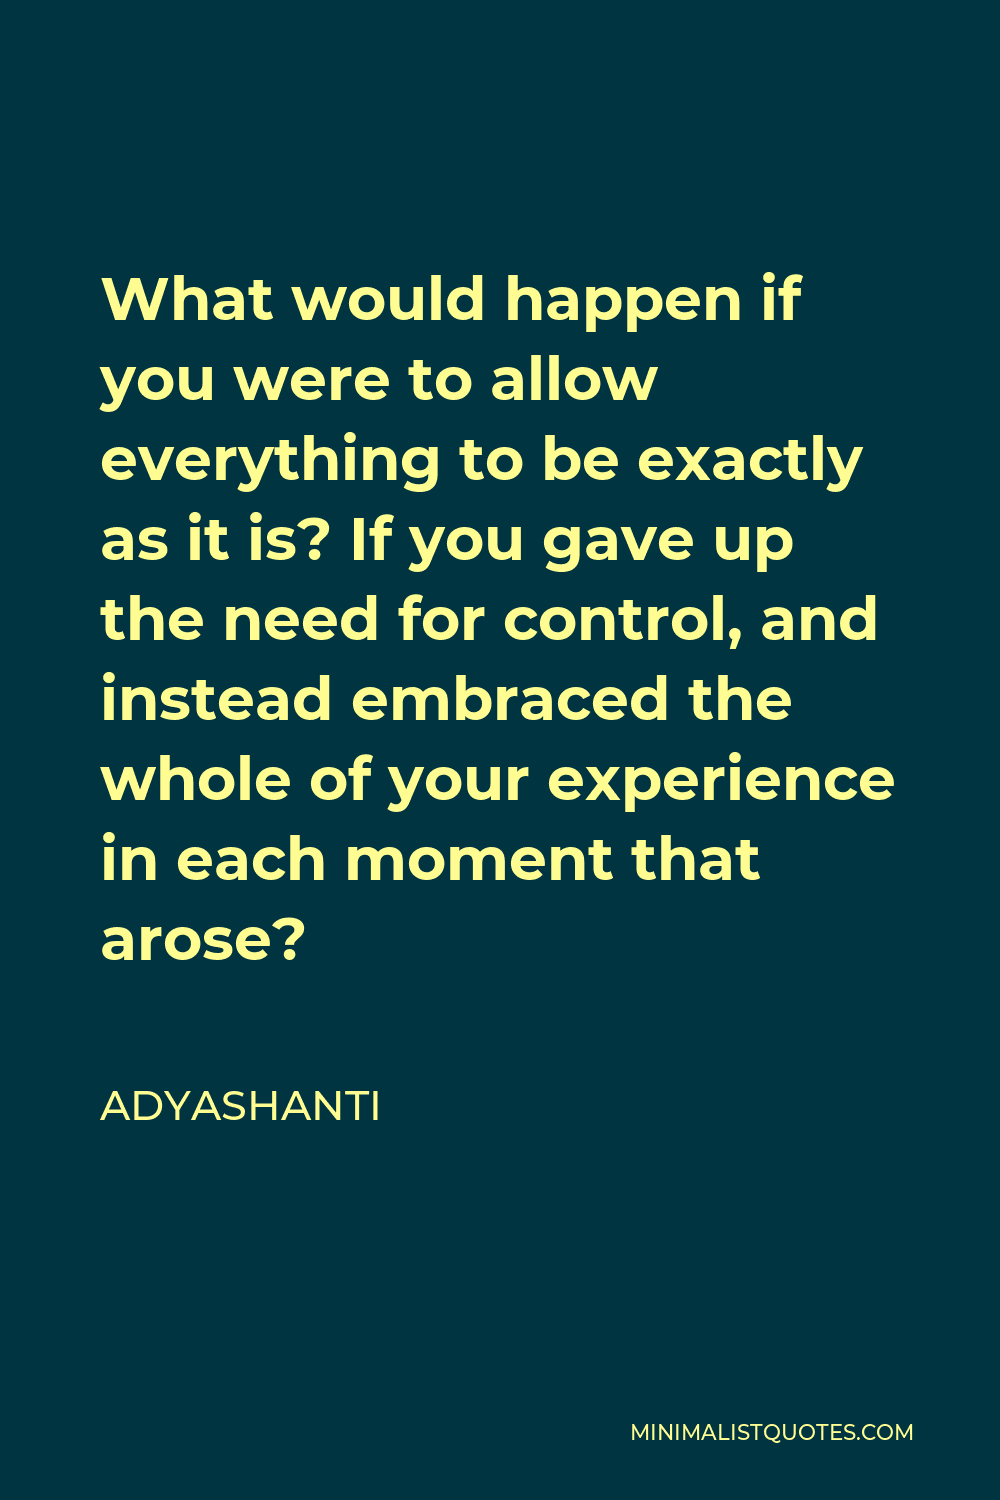 Adyashanti Quote - What would happen if you were to allow everything to be exactly as it is? If you gave up the need for control, and instead embraced the whole of your experience in each moment that arose?